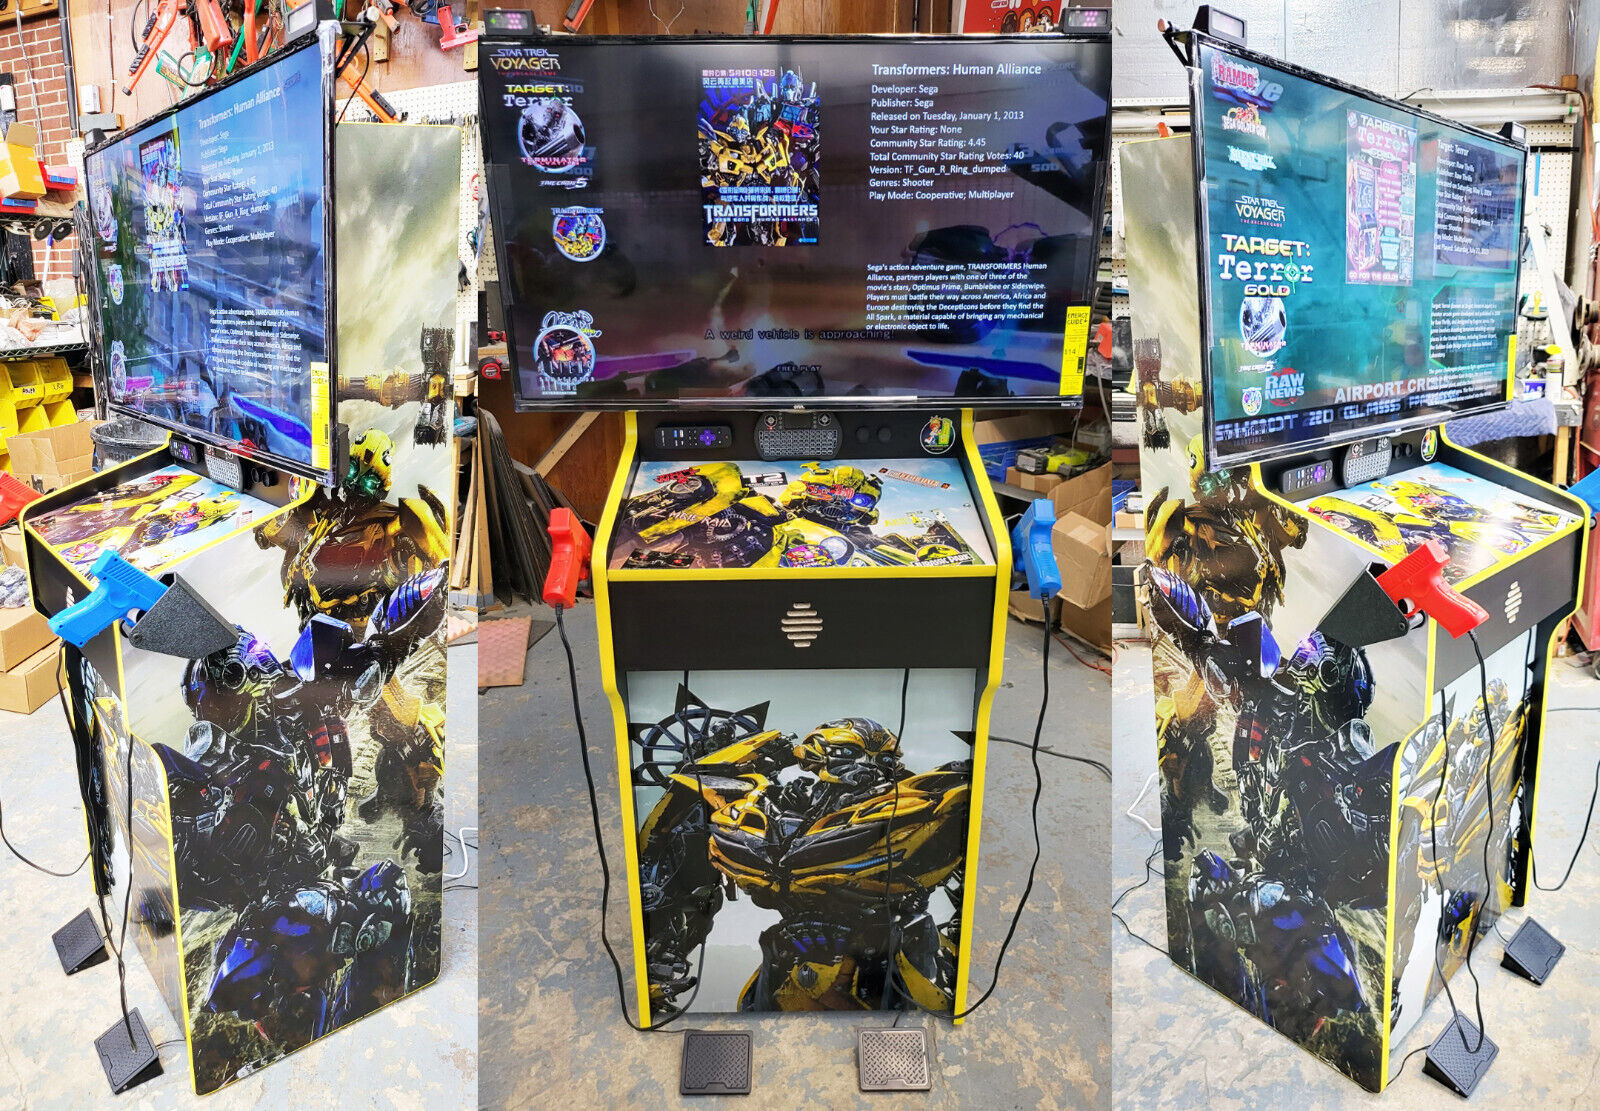 Transformers MULTICADE SHOOTER Arcade Game Multi Full Size NEW 240 Games 42